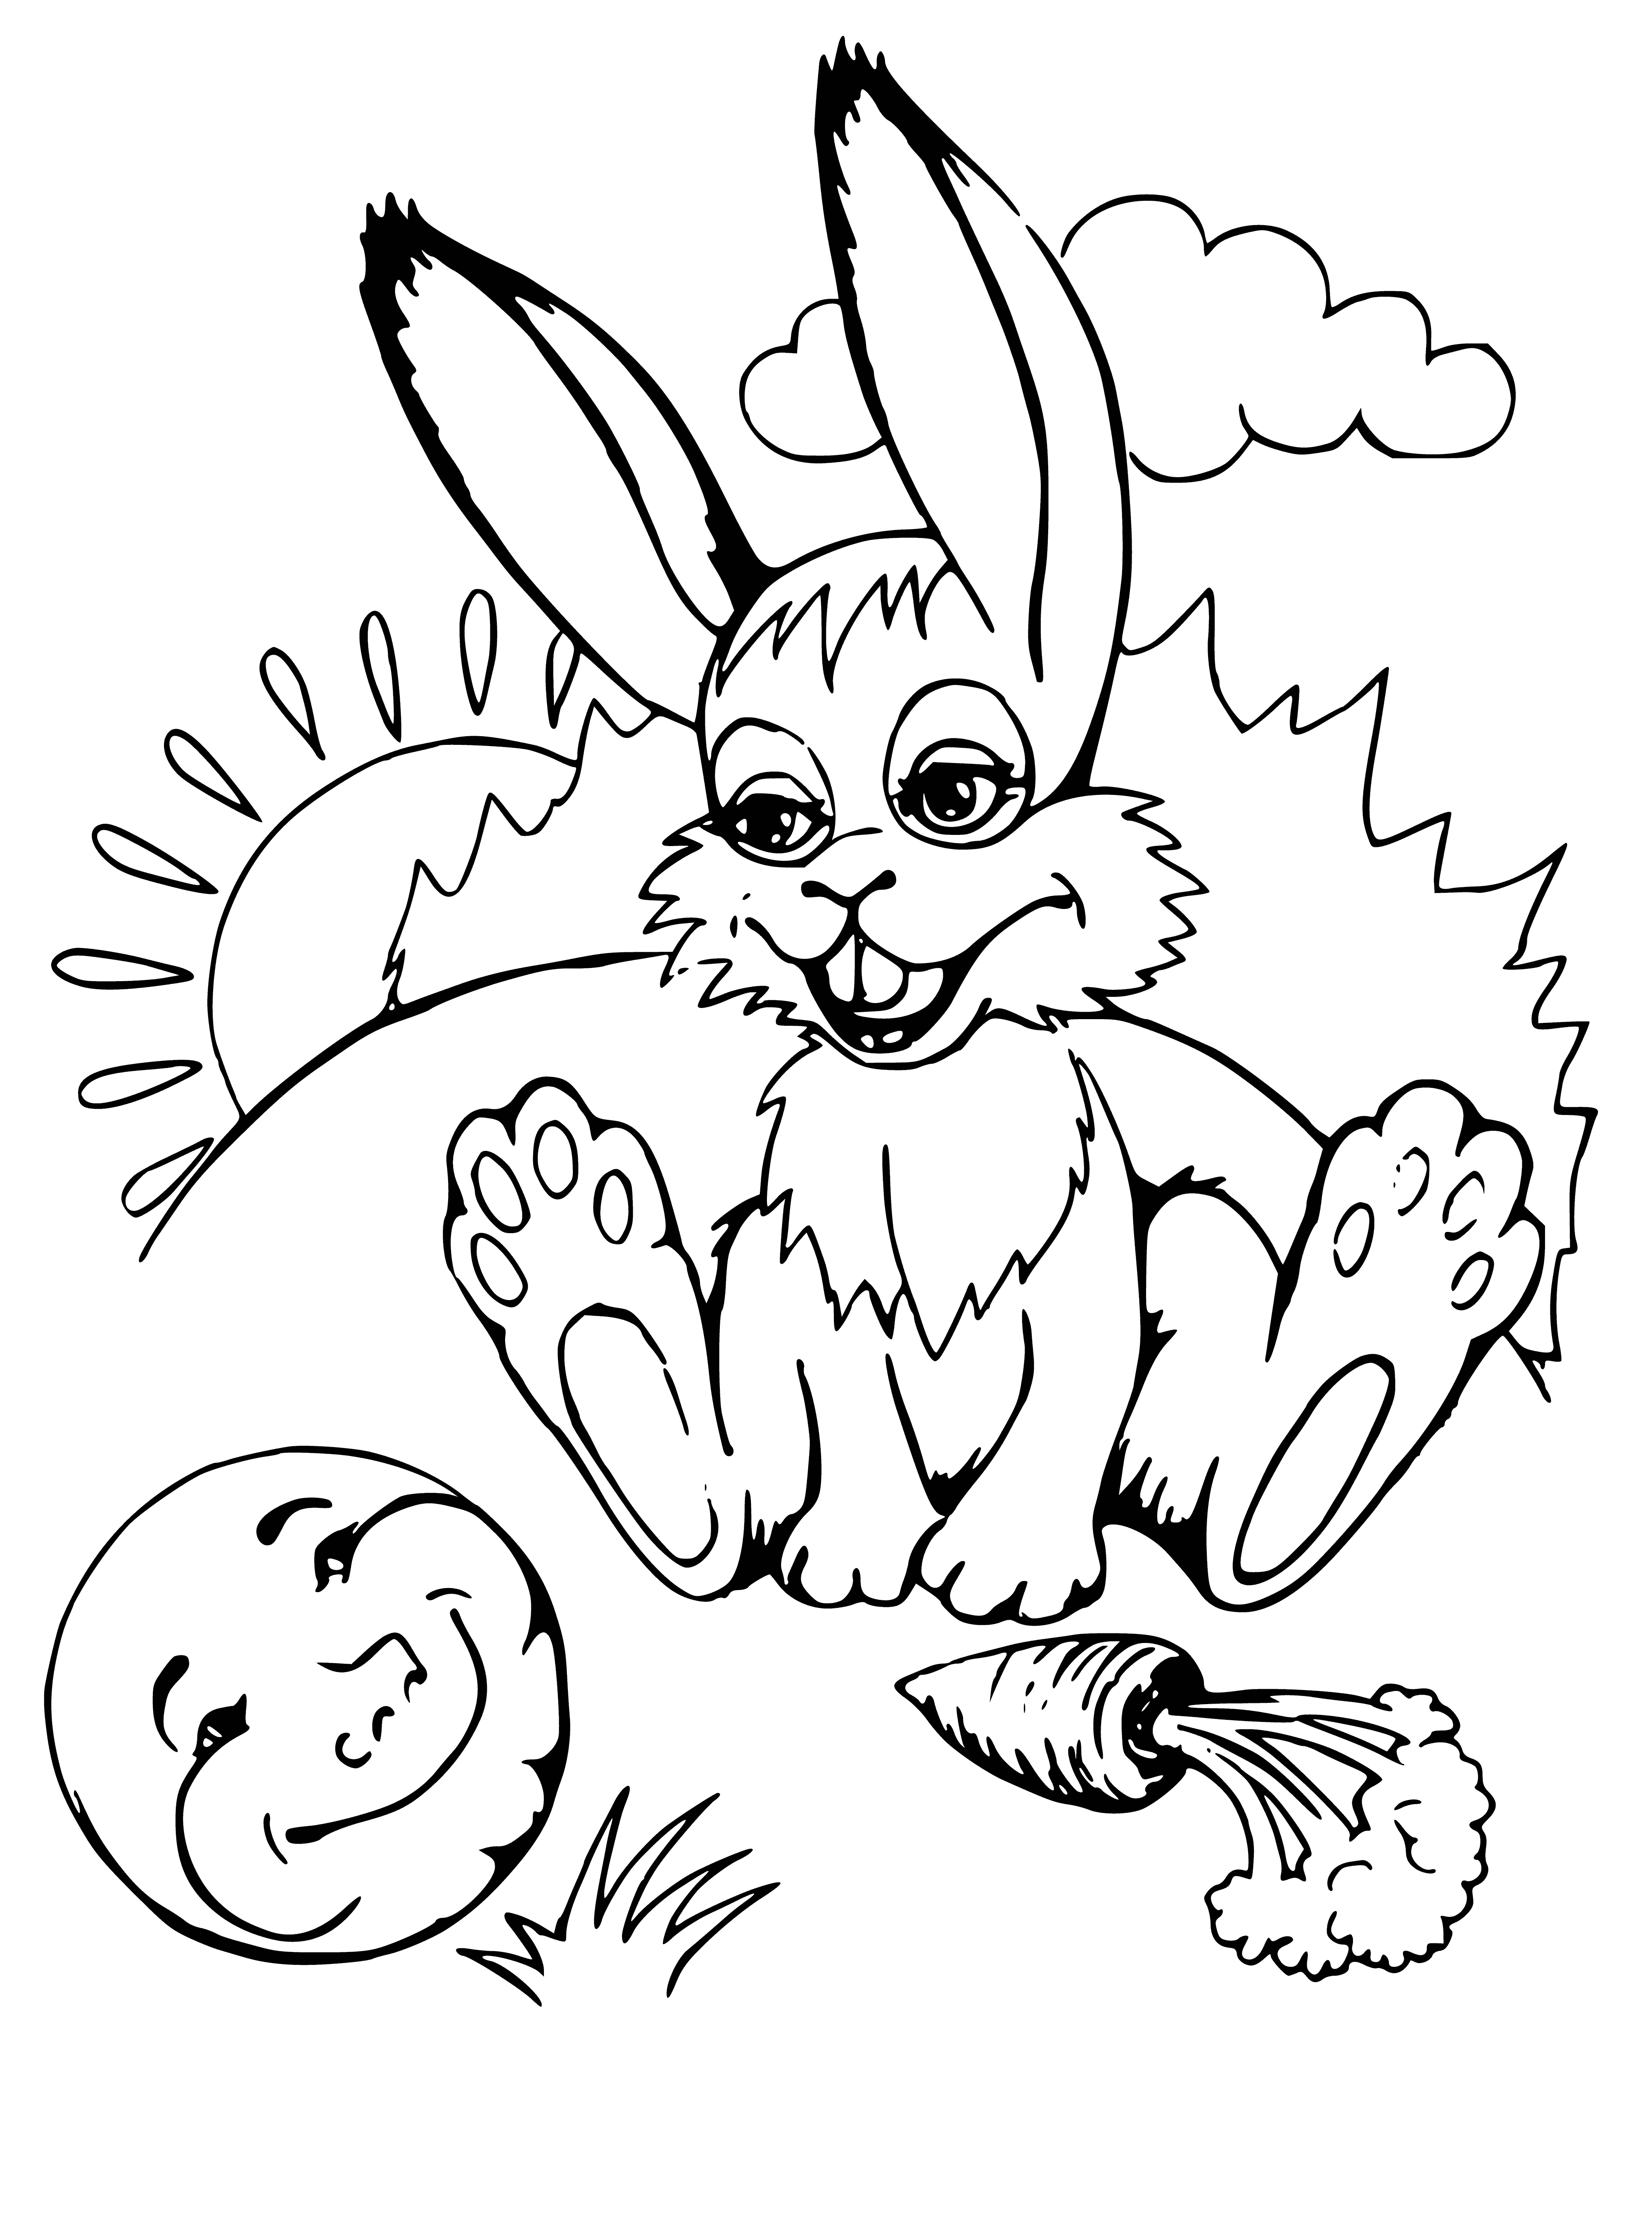 coloring page: Hare drools over bun on plate, mouth open in anticipation.